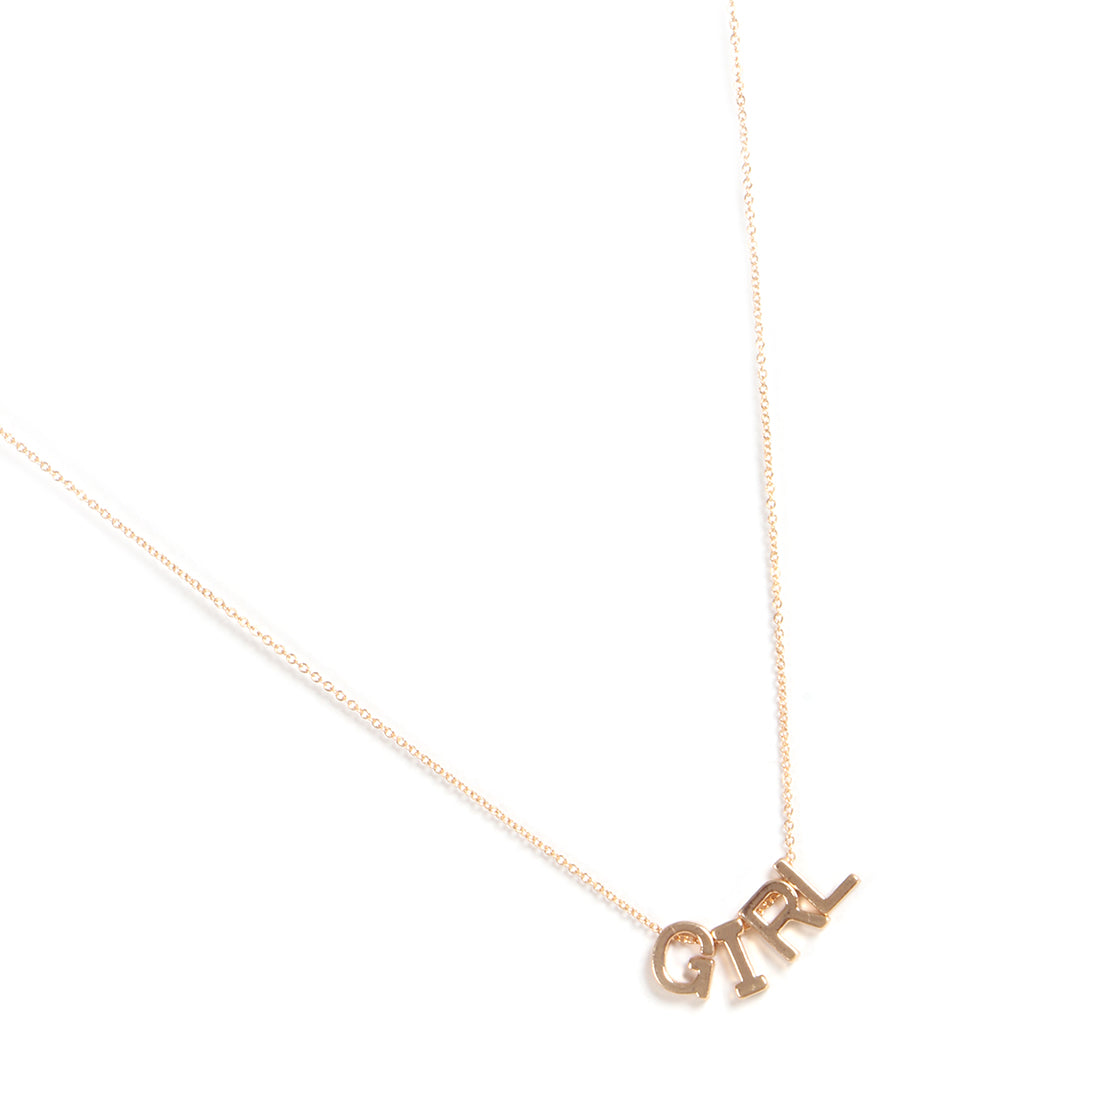 GIRL STATEMENT MINI PENDANT GOLD-TONED DAINTY NECKLACE